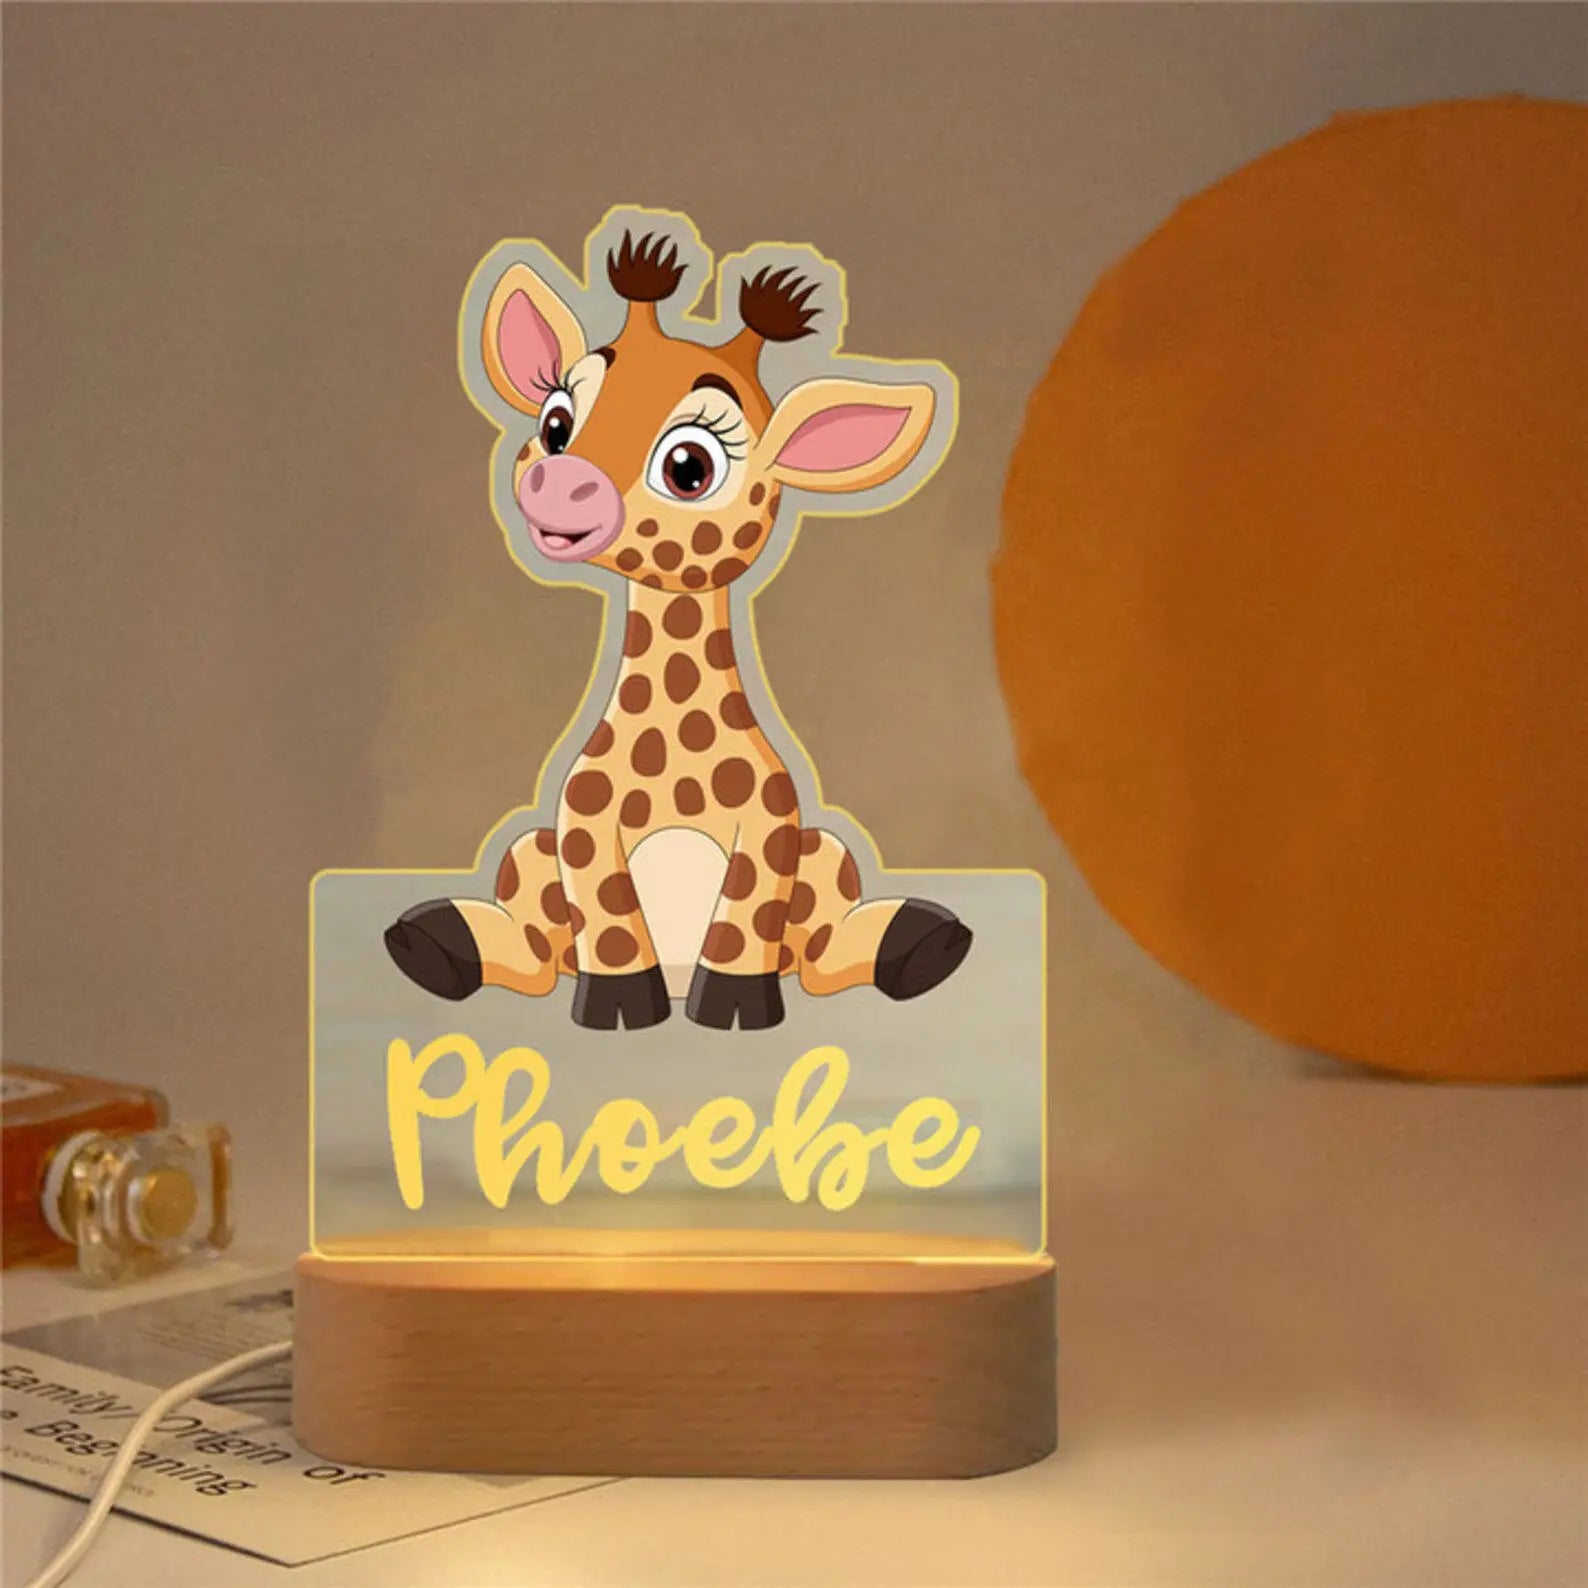 Customized Animal-themed Night Light for Kids - Personalized with Child's Name, Acrylic Lamp for Bedroom Decor Warm Light / 26Giraffe